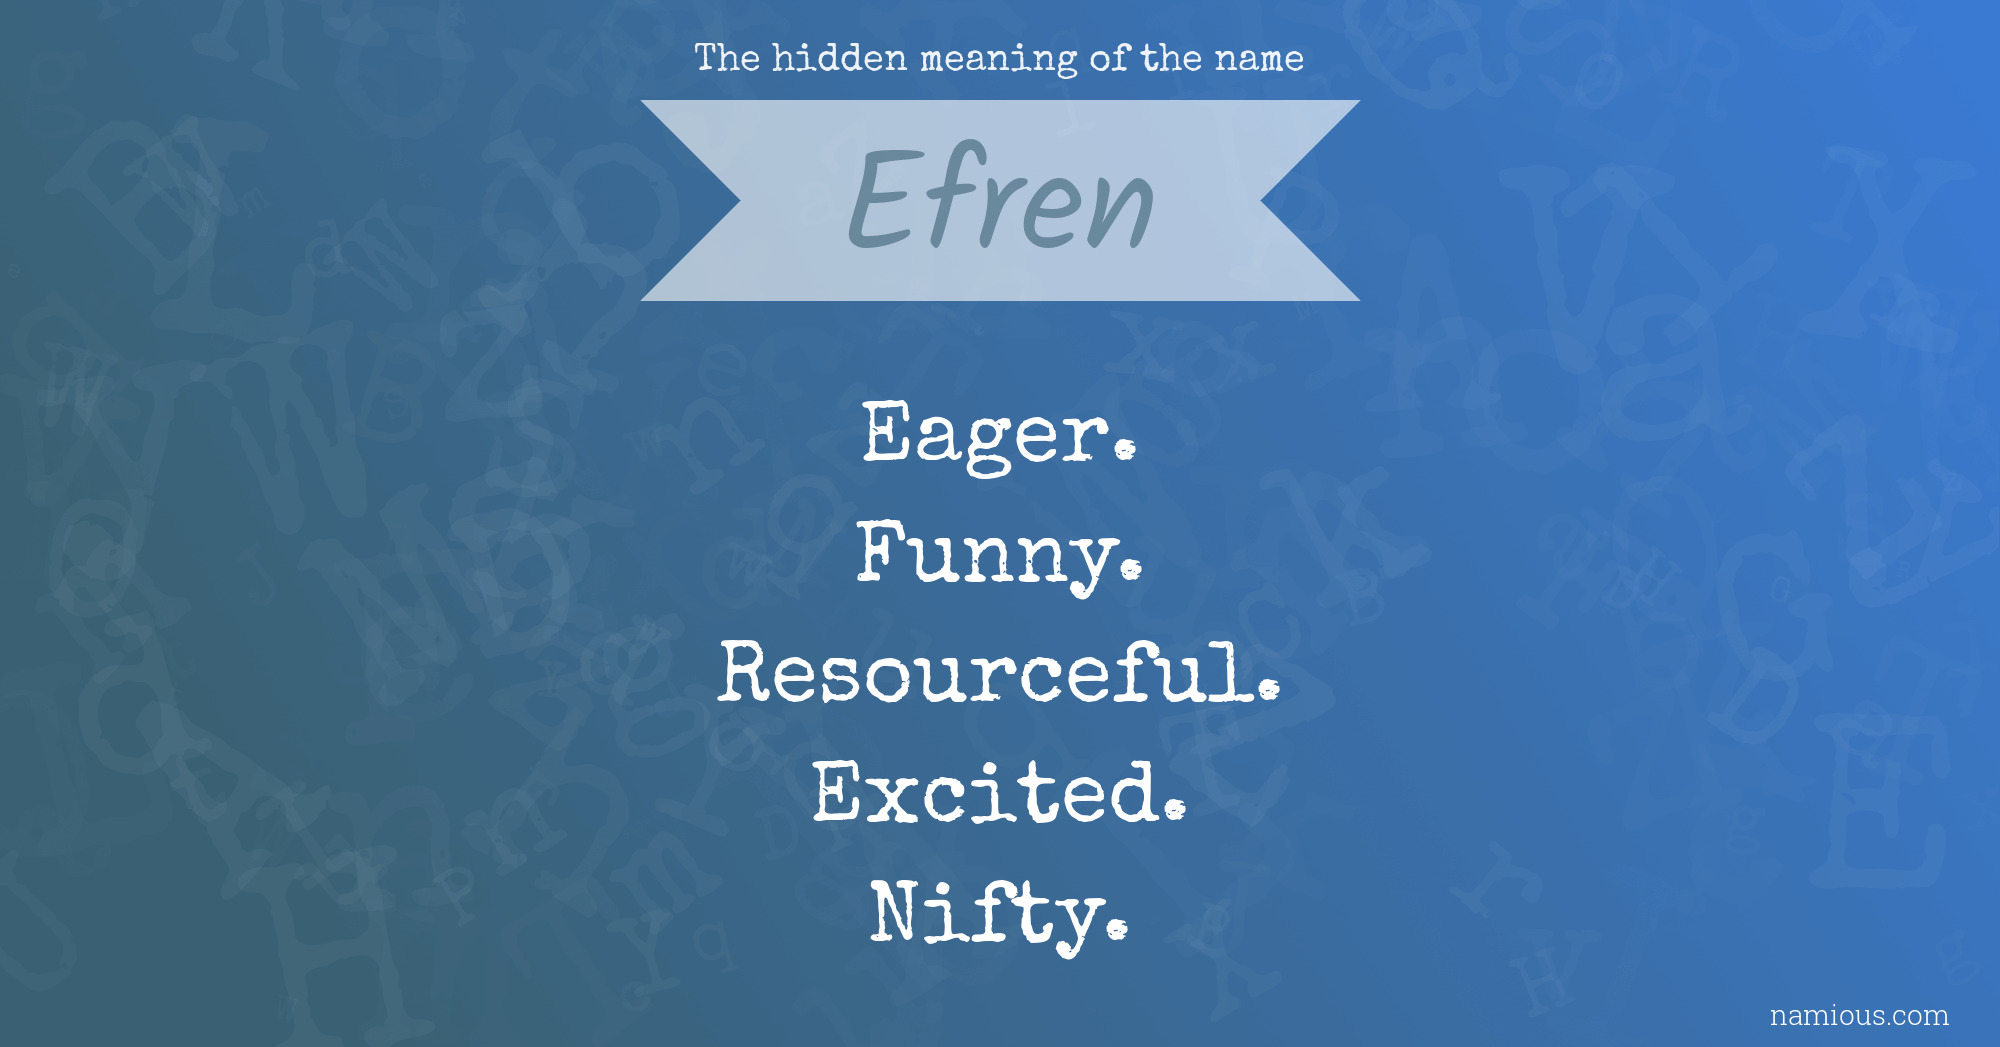 The hidden meaning of the name Efren